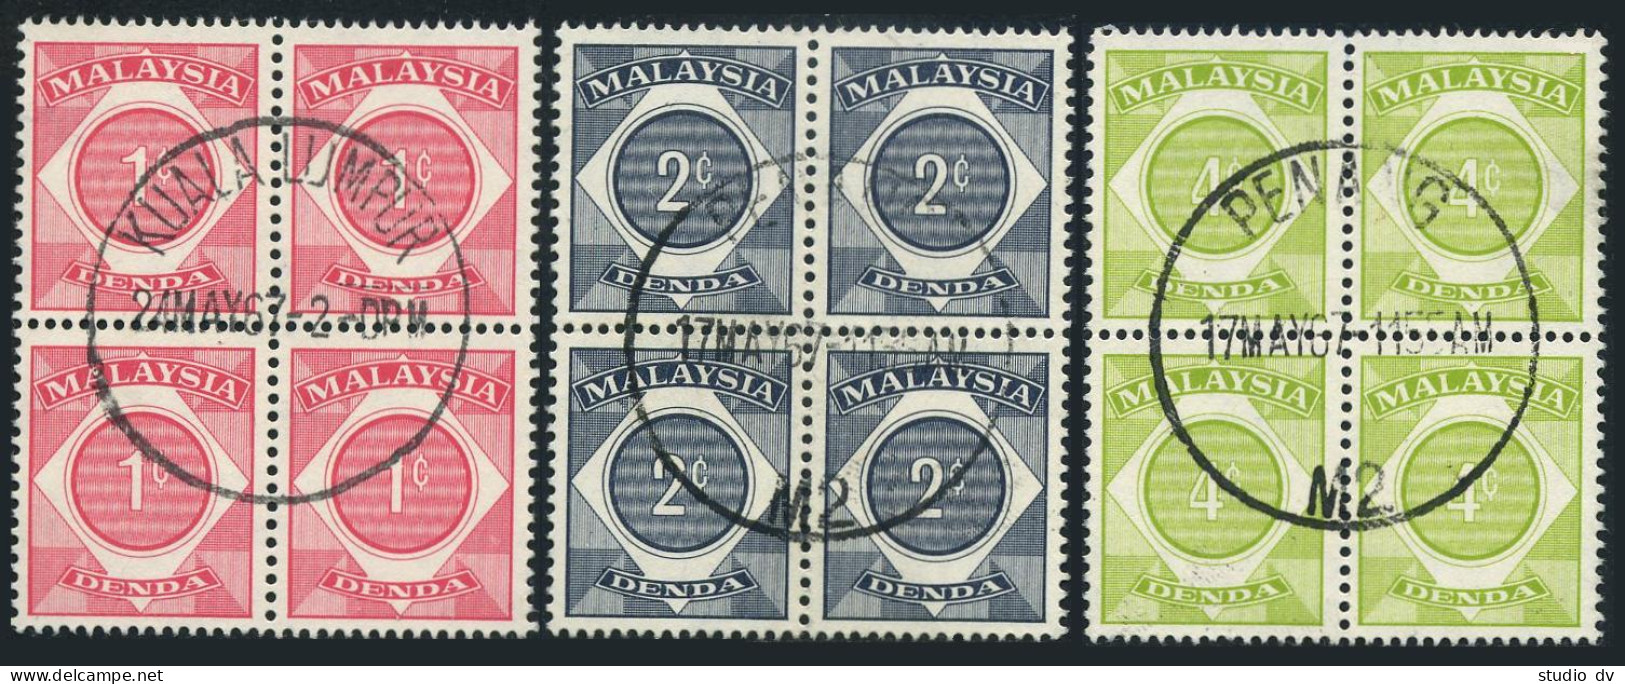 Malaysia J1-J3 Blocks/4,CTO.Michel P8-P10. Postage Due Stamps,1966.Numeral. - Maleisië (1964-...)